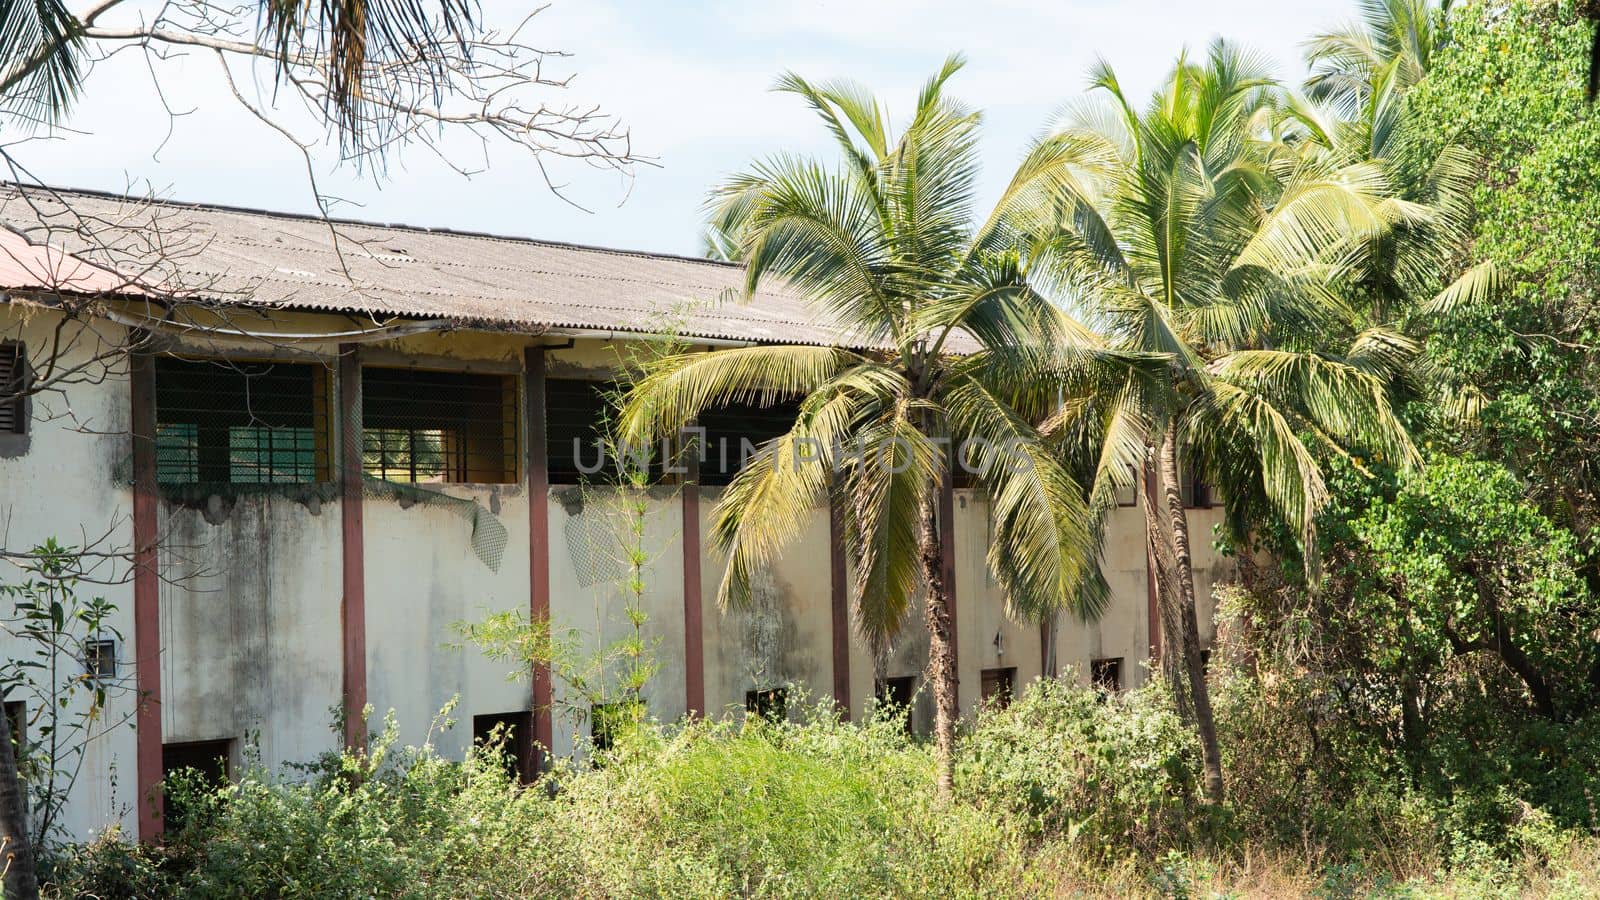 Abandoned old building in the jungle with palm trees. High quality photo